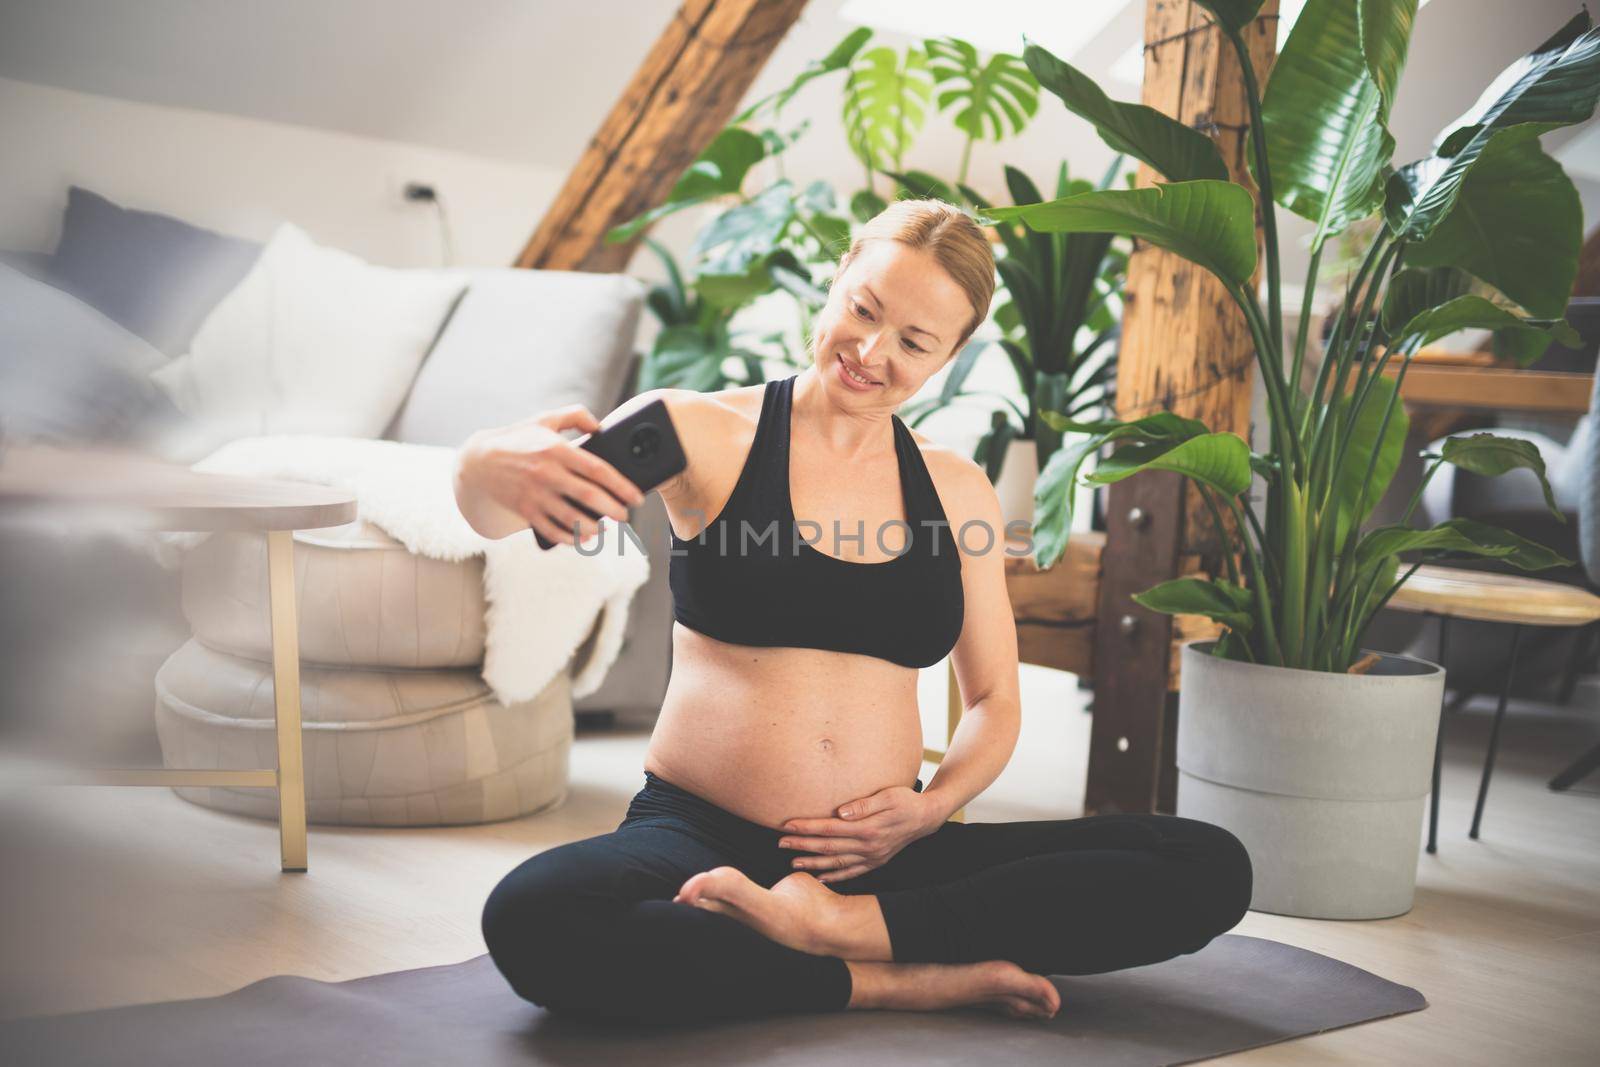 Young happy and cheerful beautiful pregnant woman taking selfie with her mobile phone while staying fit, sporty and active on her maternity leave. Motherhood, pregnancy, yoga concept